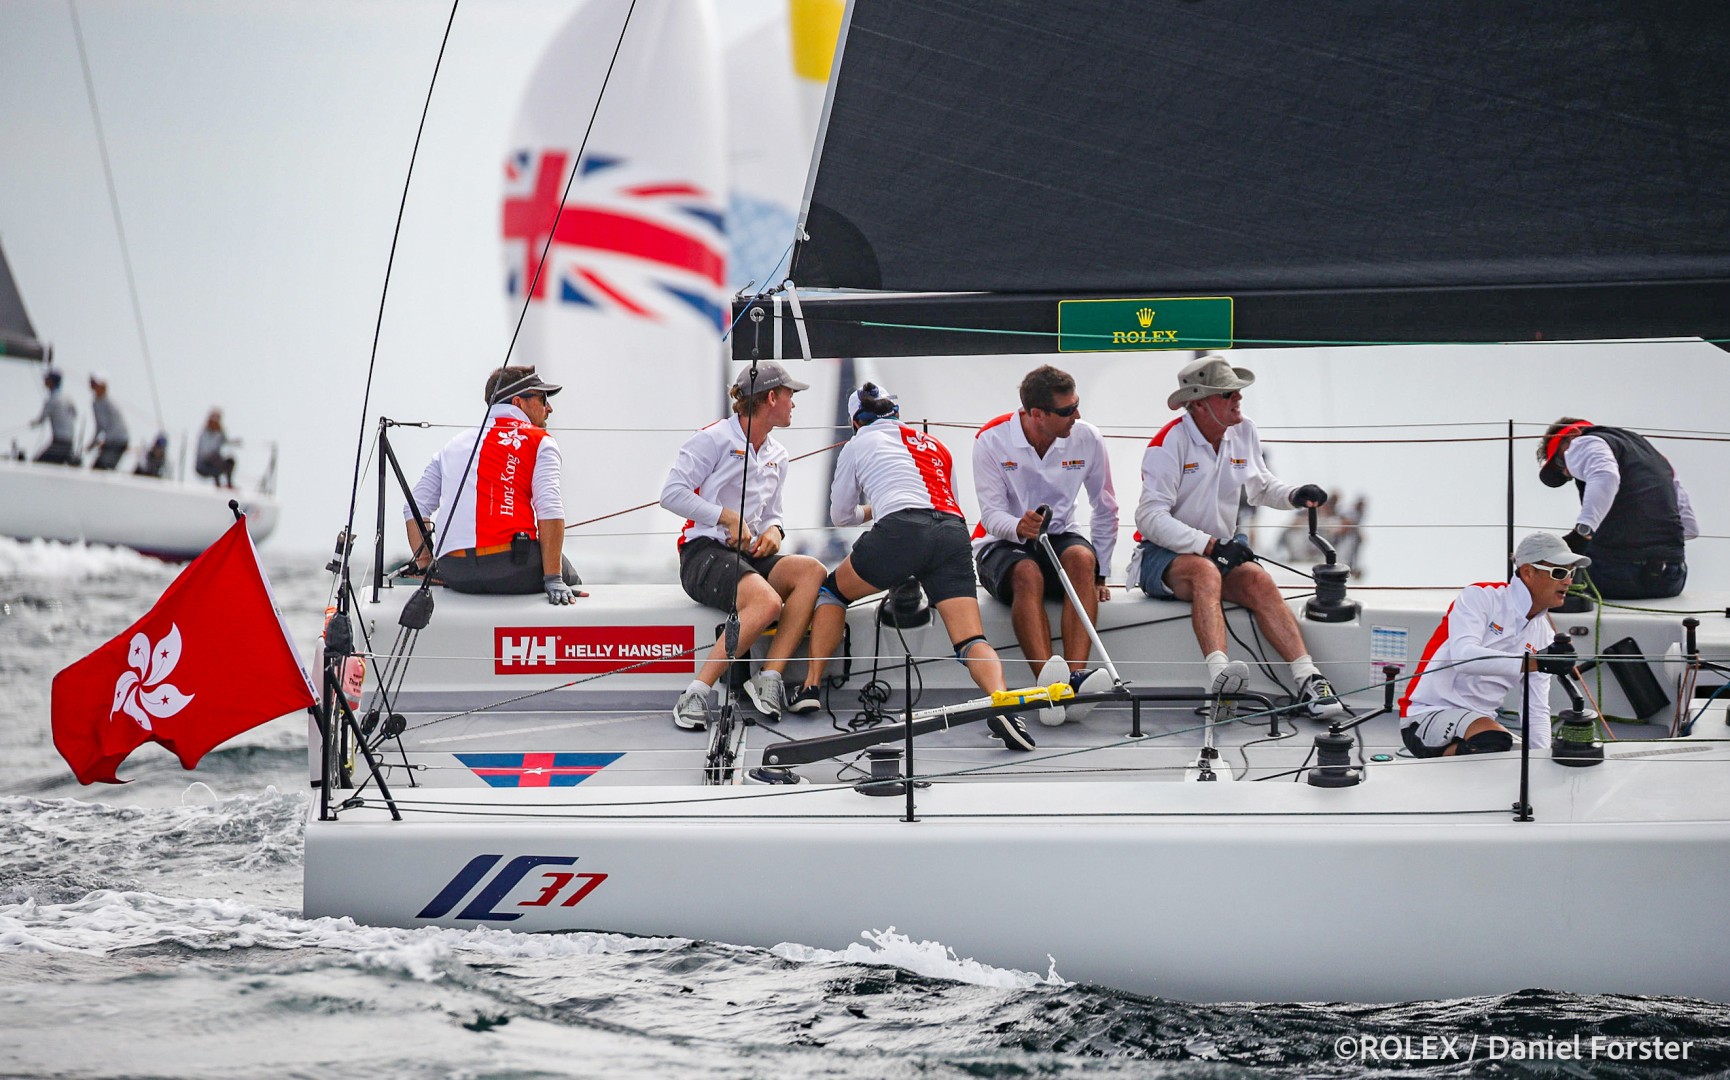 Youth Serves Up a Win for Royal Hong Kong Yacht Club on Day 2 of Rolex NYYC Invitational Cup